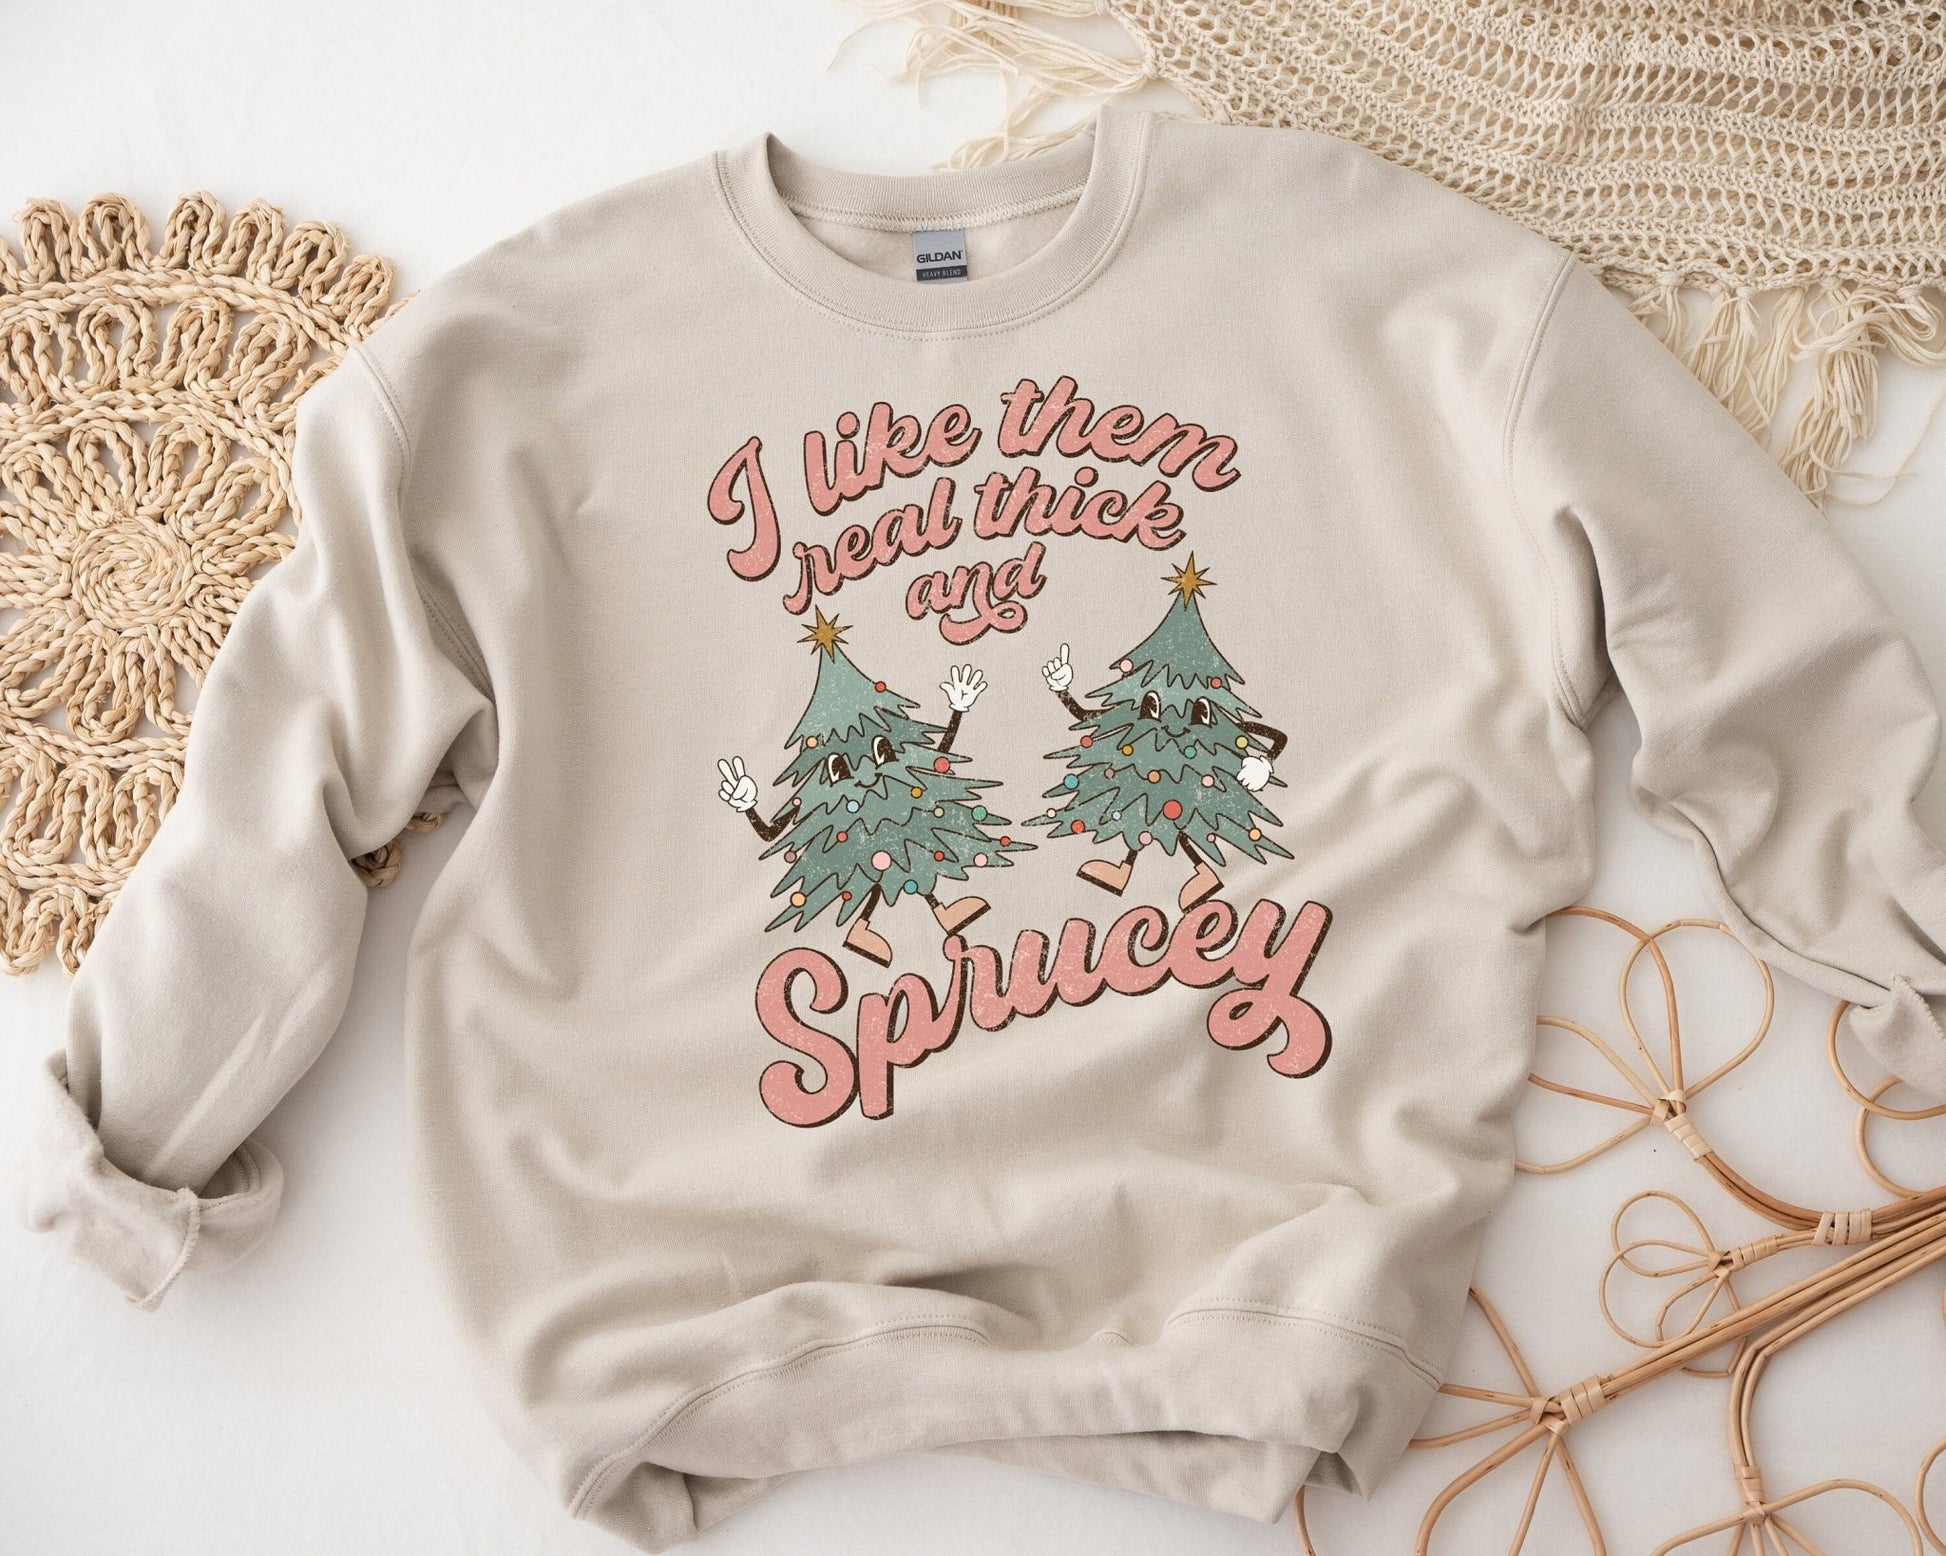 Retro Christmas Holiday Sweater Weather Funny Sweatshirt Thick and Sprucey - Squishy Cheeks